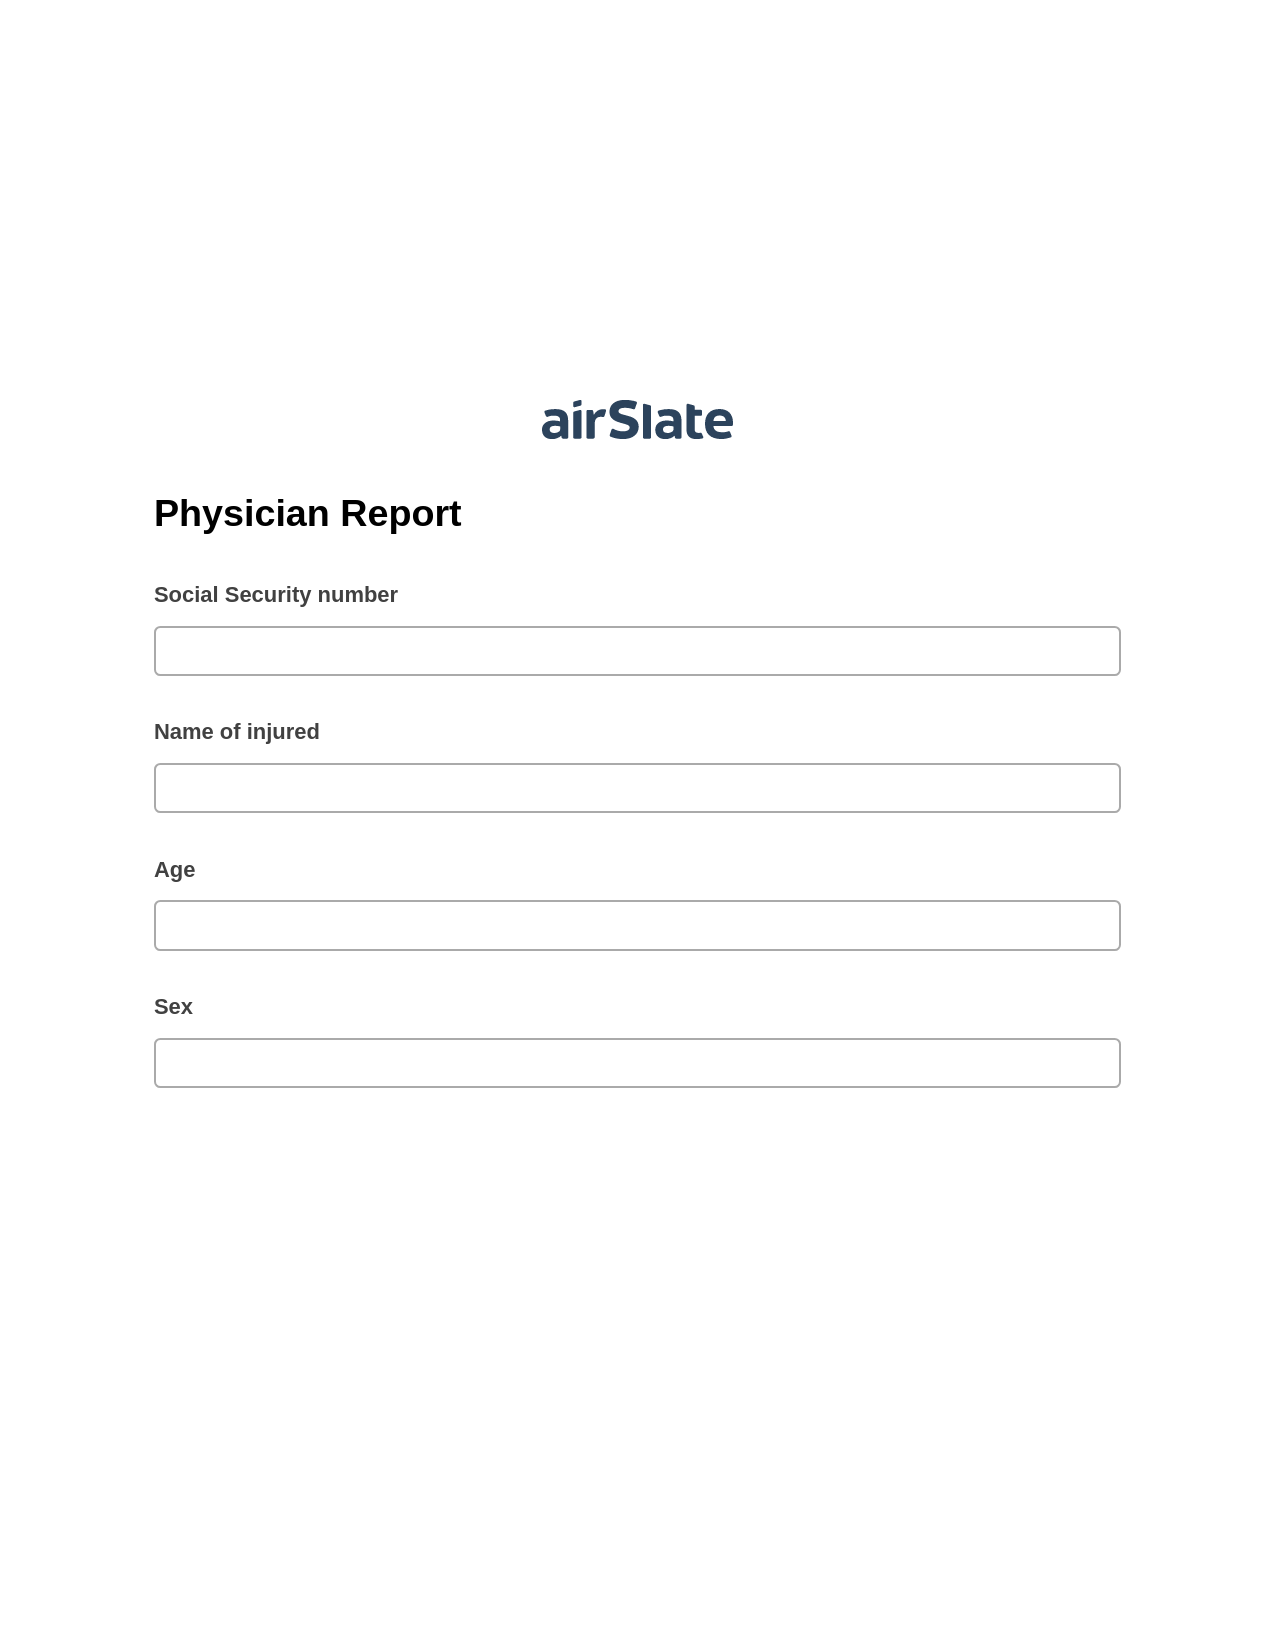 Multirole Physician Report Pre-fill from another Slate Bot, Update NetSuite Record Bot, Post-finish Document Bot